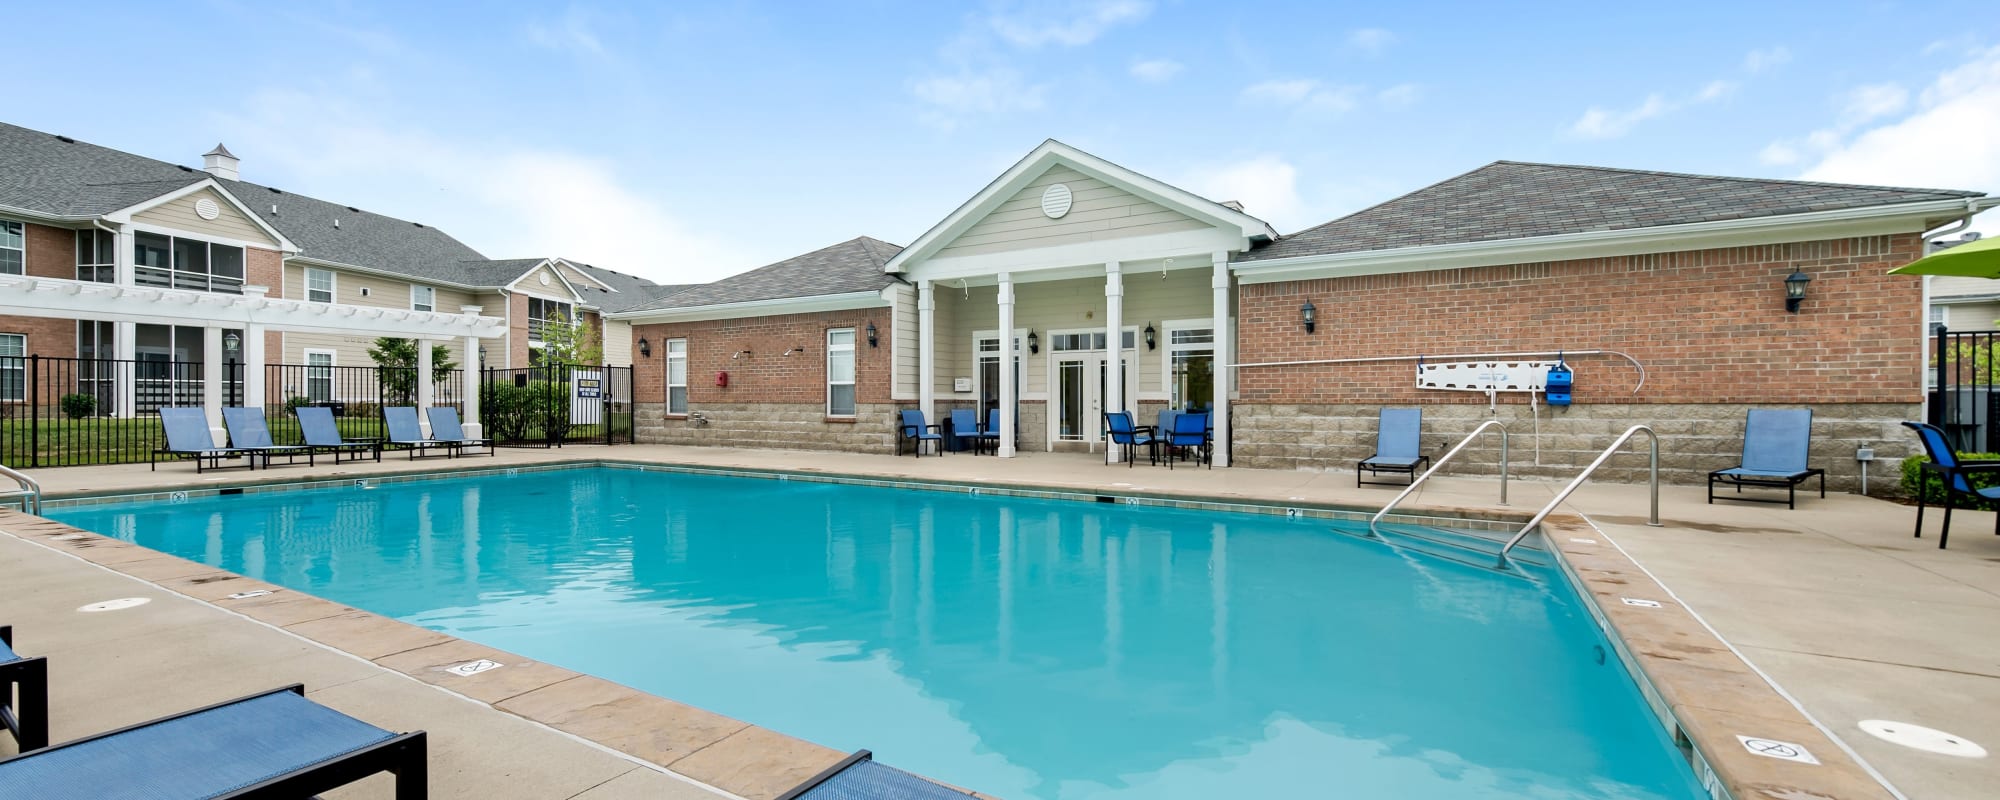 Apartments at Cumberland Pointe in Noblesville, Indiana